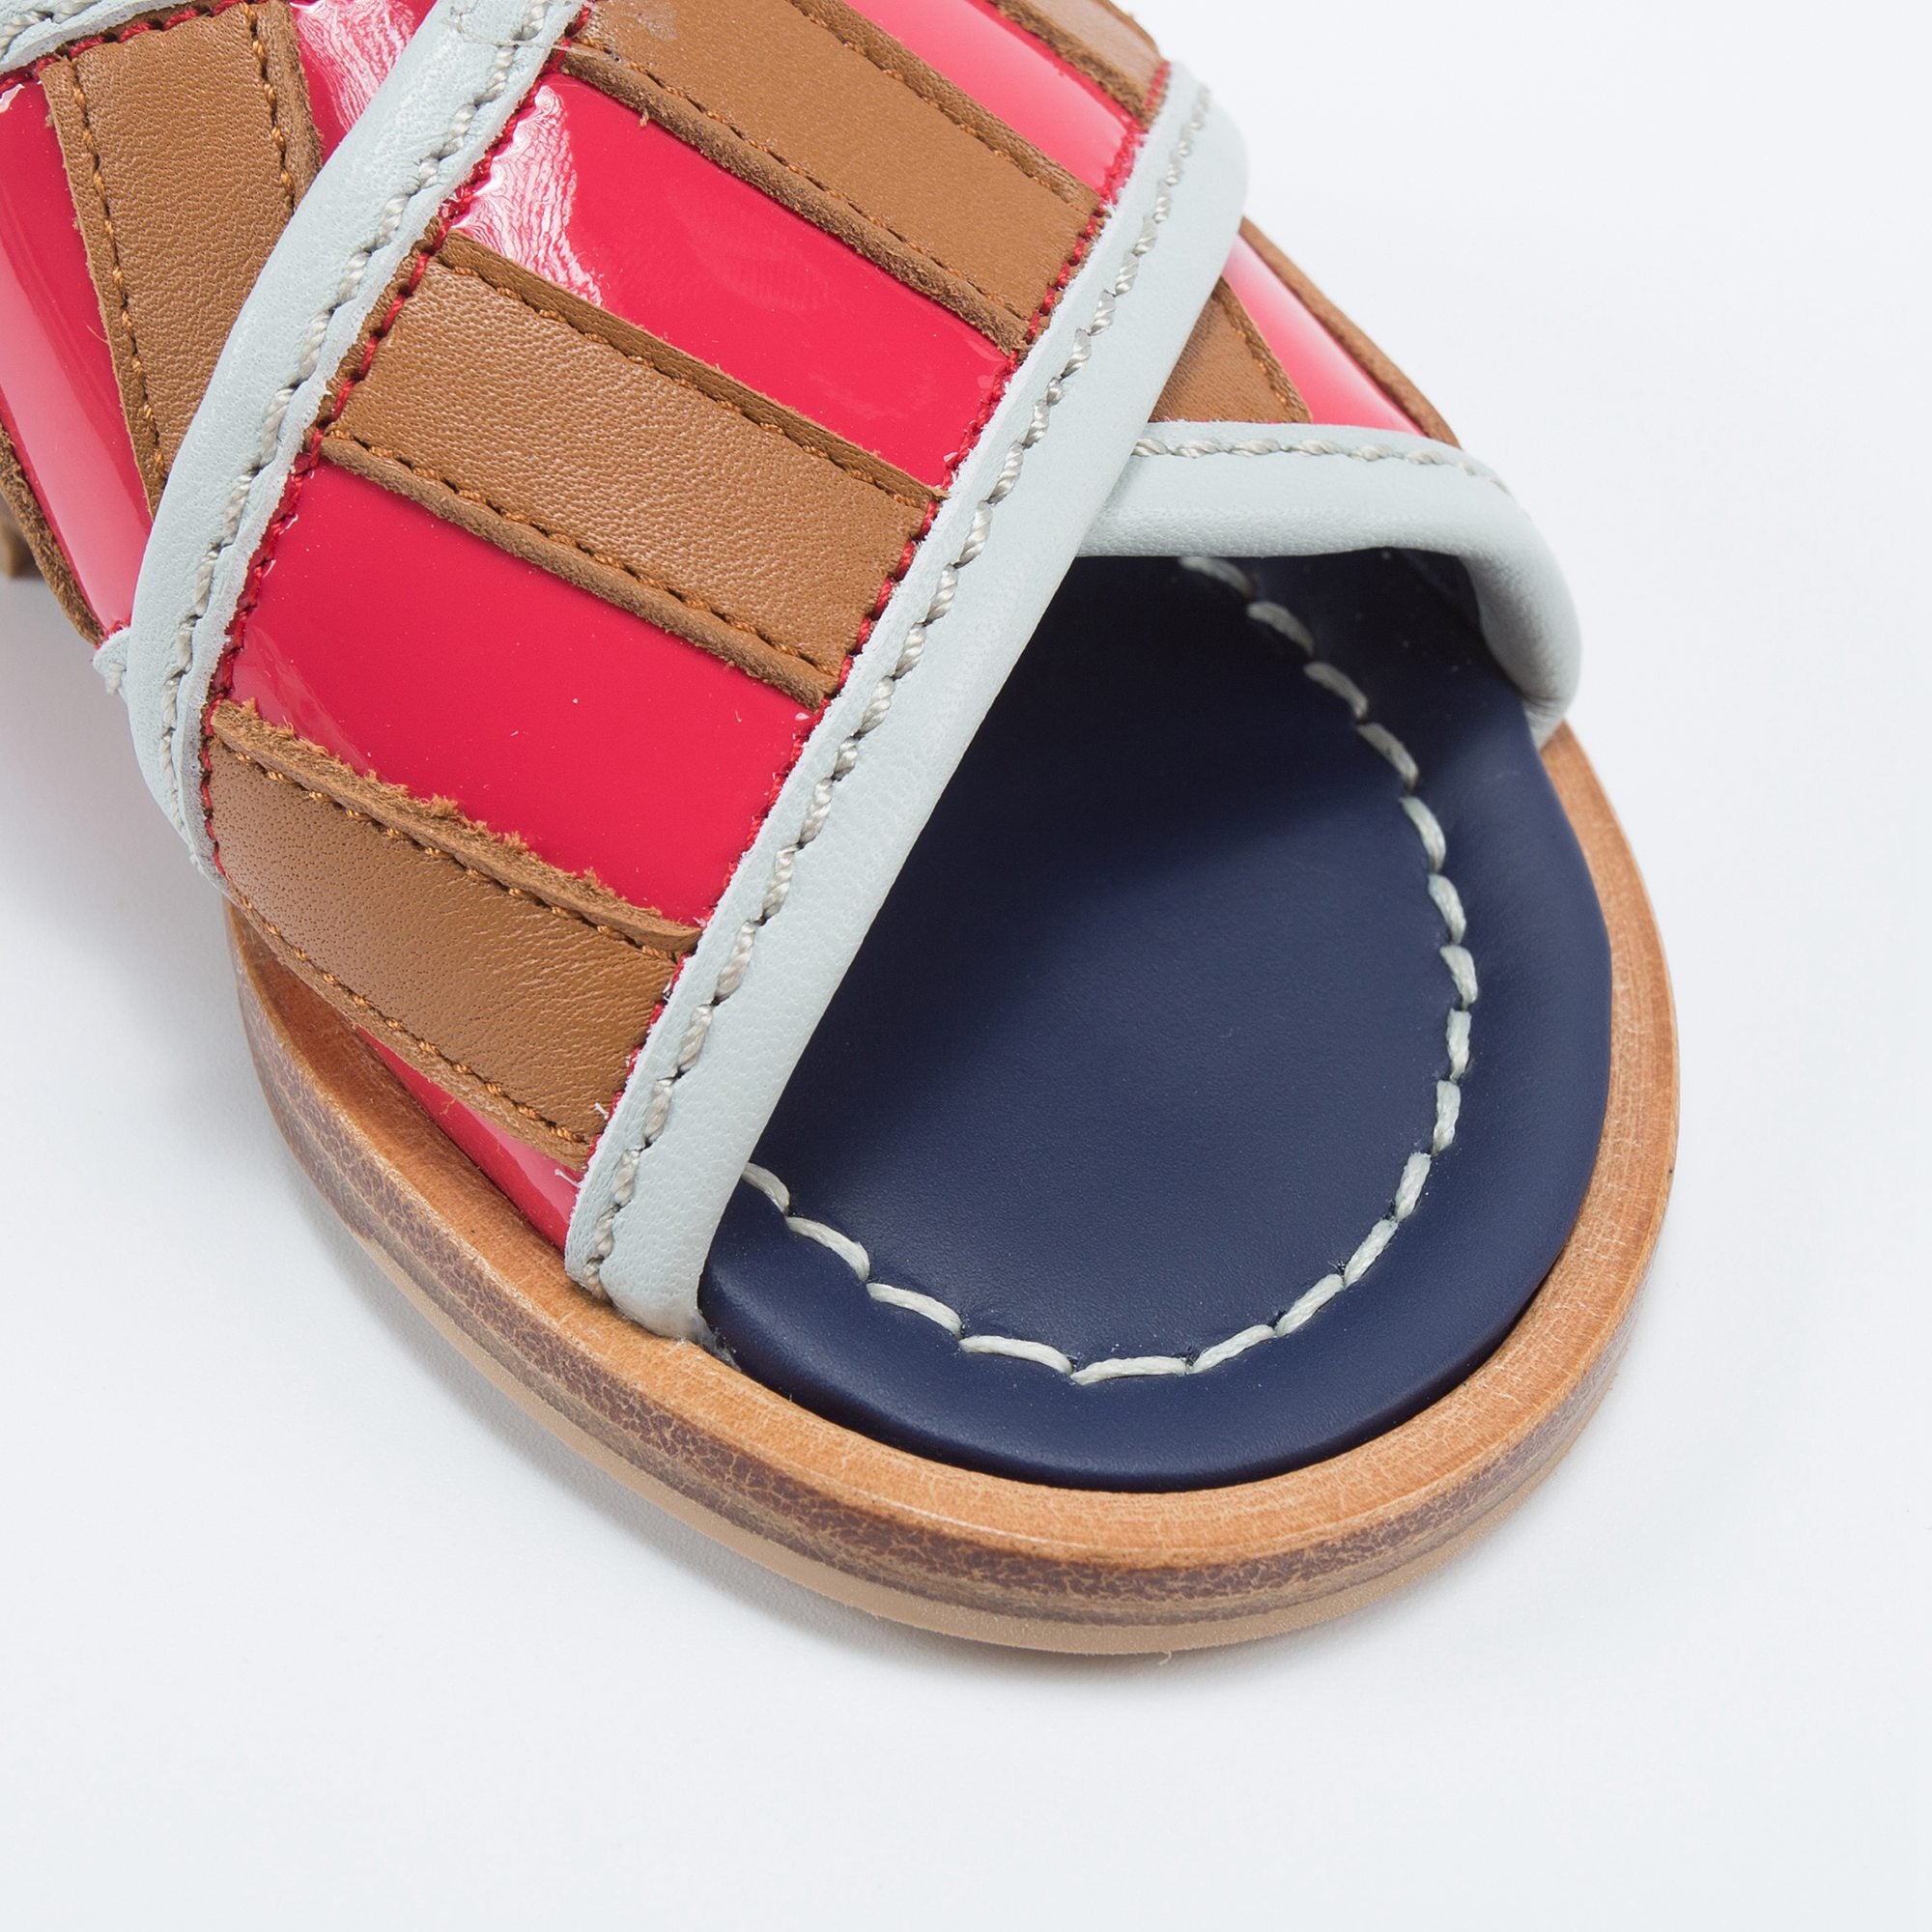 Girls Brown & Pink Leather Sandals